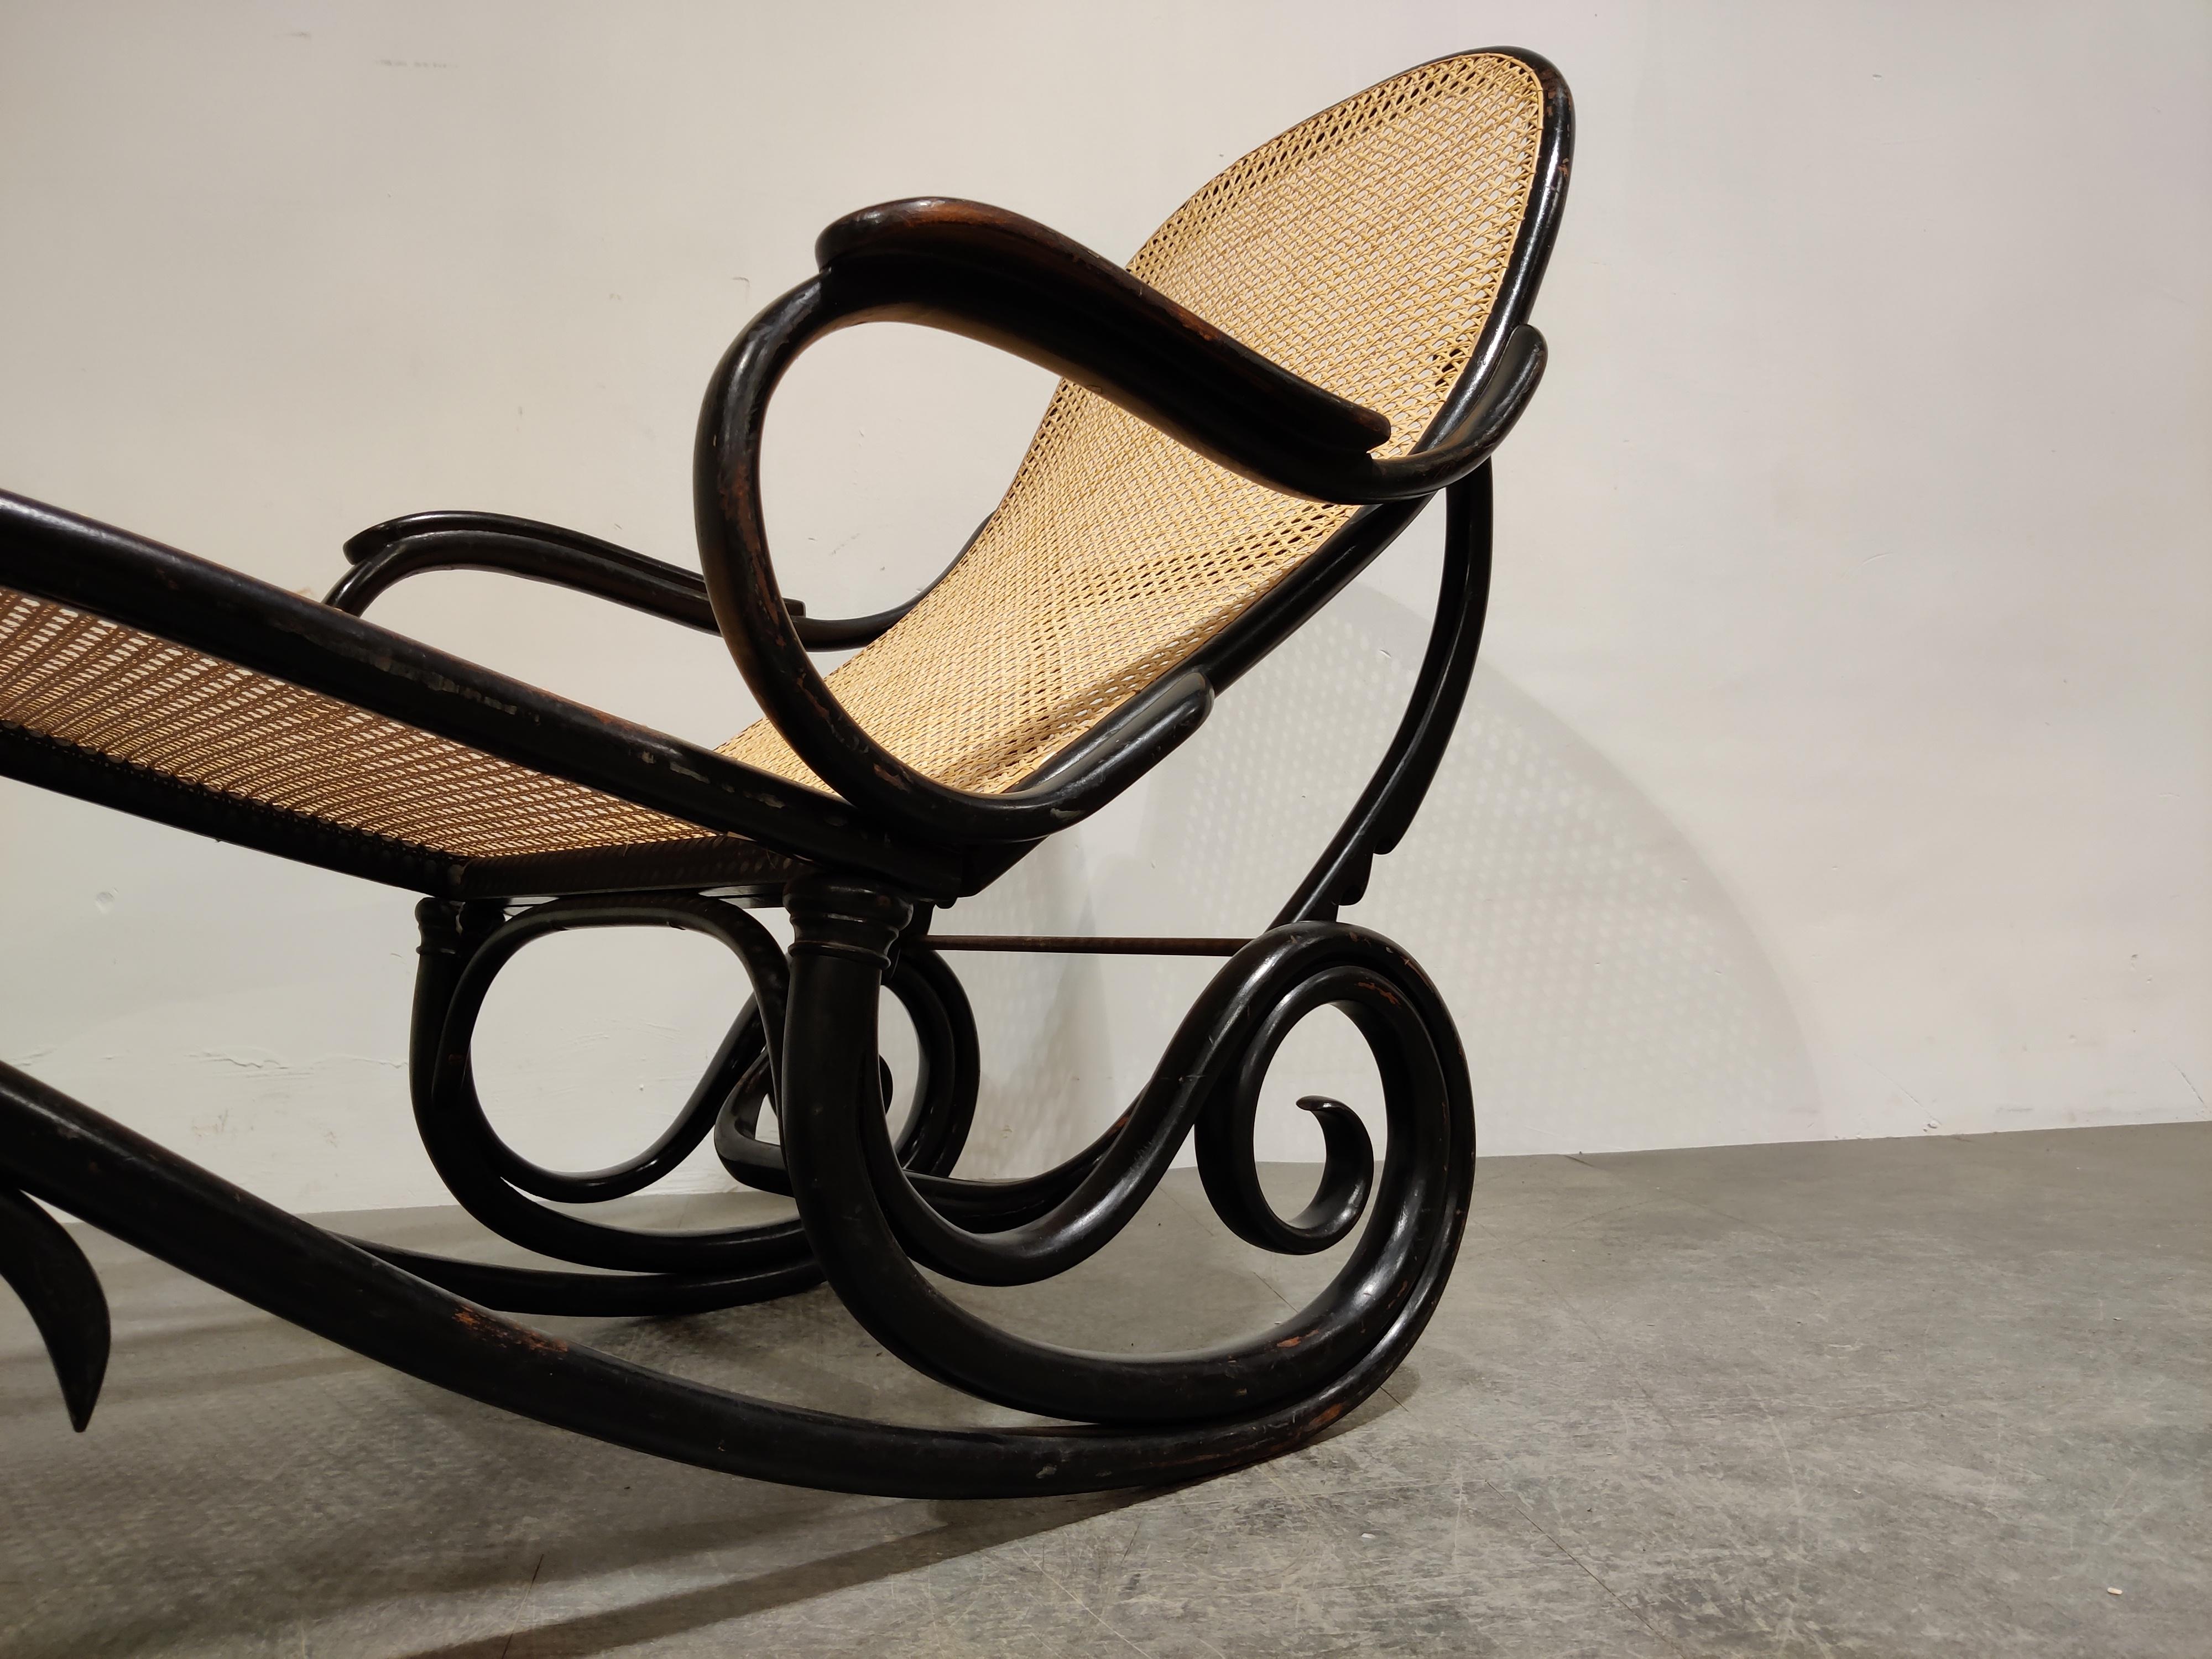 Cane Antique Chaise Longue by Michael Thonet for Thonet Model 9702, 1920s